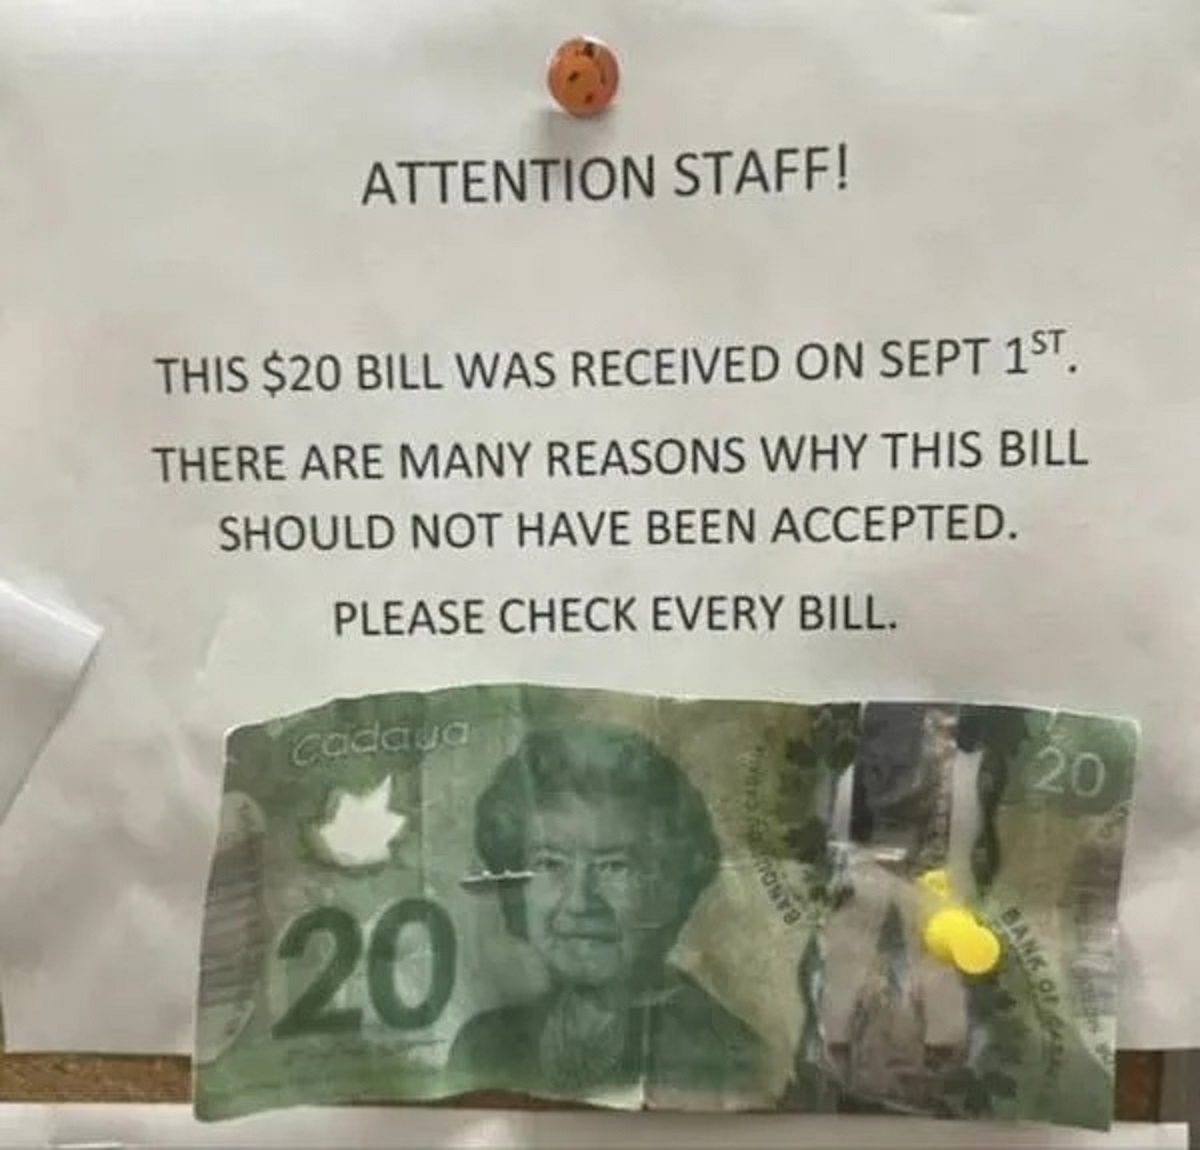 cadaua 20 bill - Attention Staff! This $20 Bill Was Received On Sept 1ST. There Are Many Reasons Why This Bill Should Not Have Been Accepted. Please Check Every Bill. Cadaua 20 Banquy Cal 20